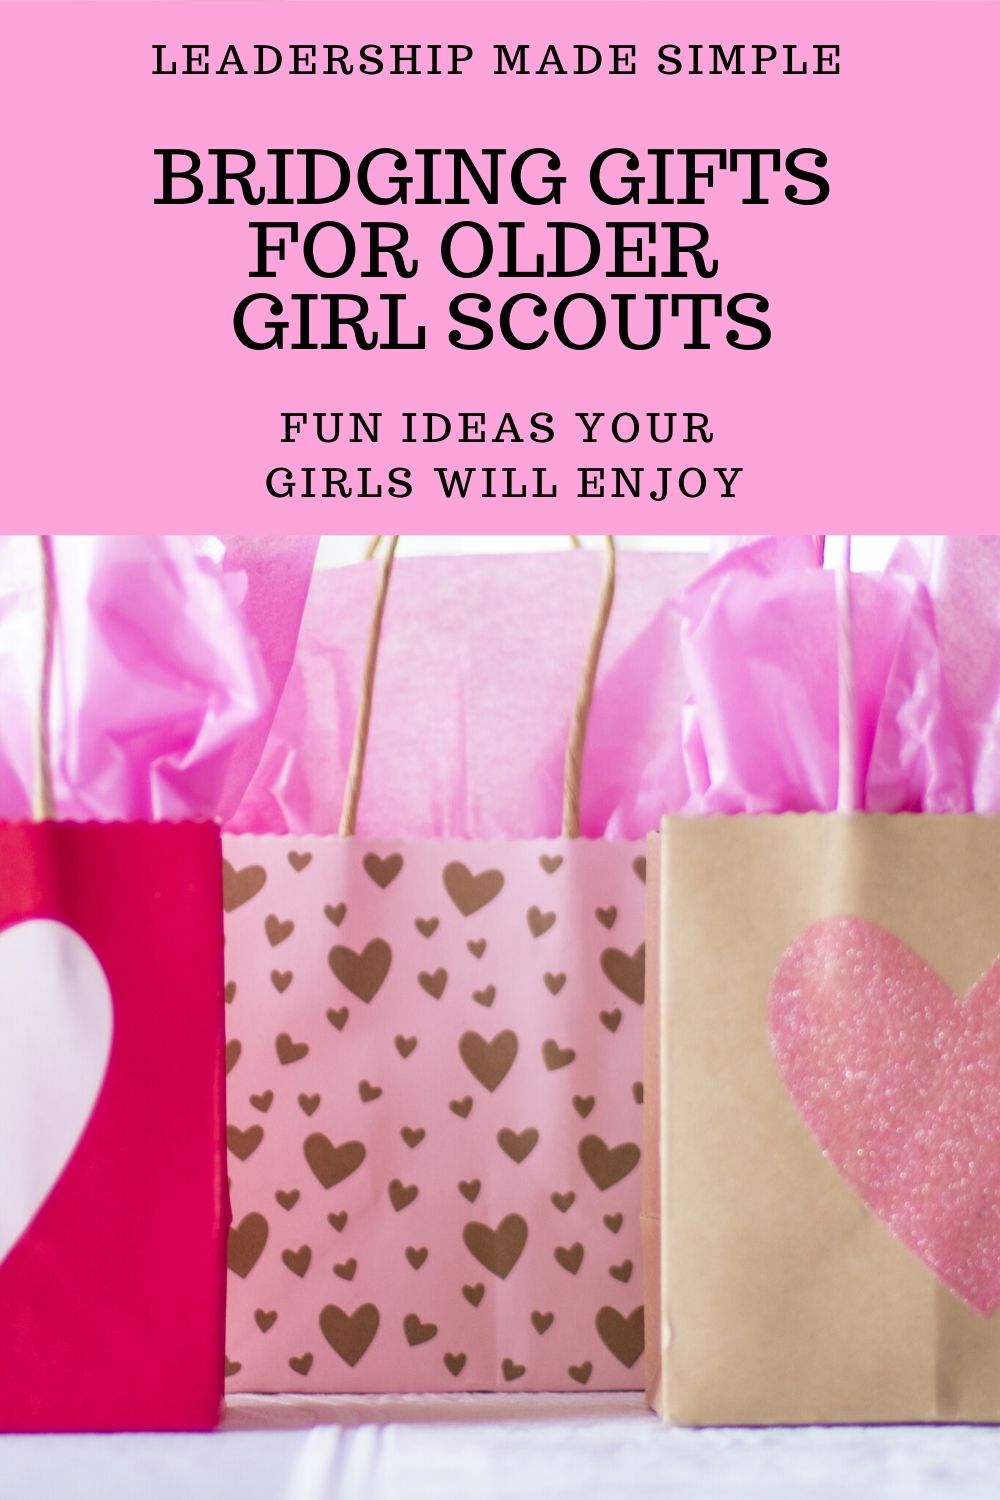 gifts for girl scout, gifts for older girl scouts